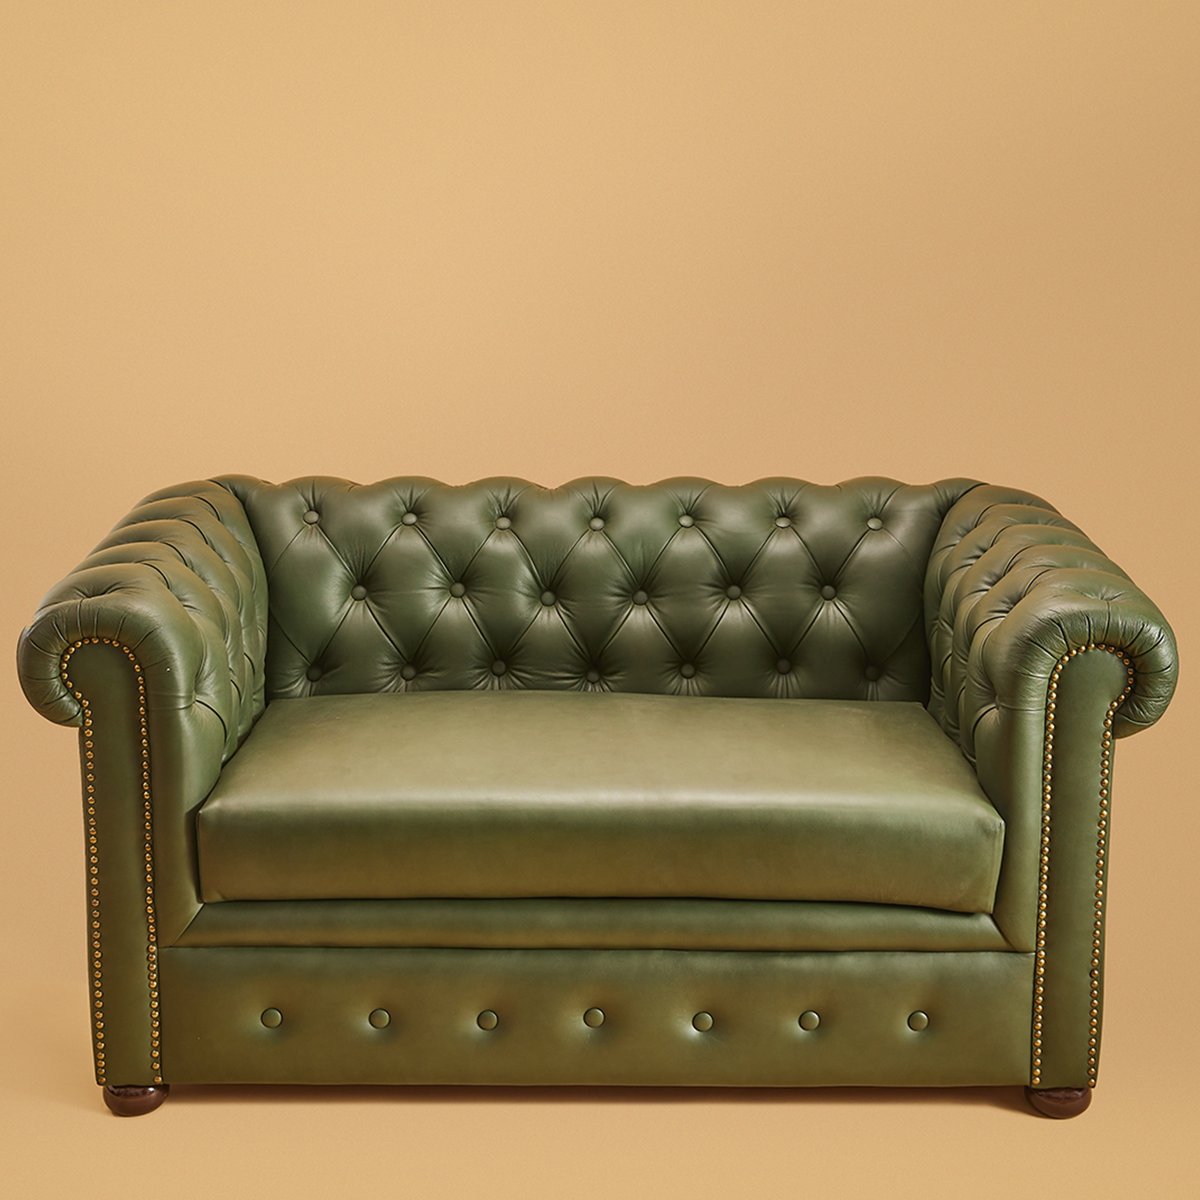 Genuine Leather Olive Green 2 Seater Chesterfield Sofa